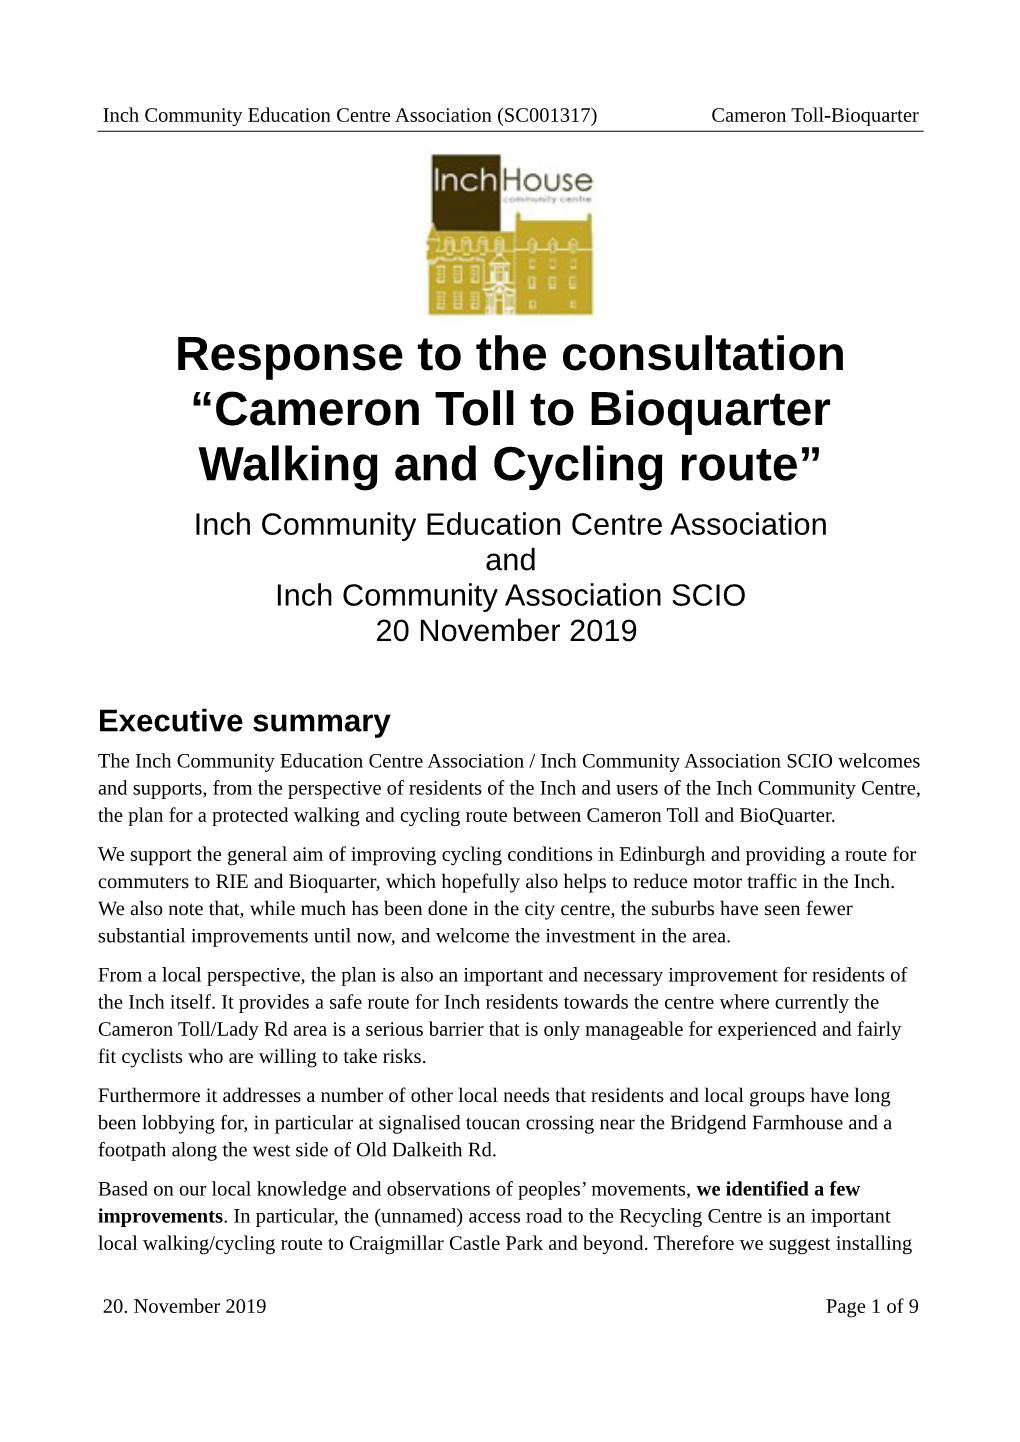 Cameron Toll to Bioquarter Walking and Cycling Route” Inch Community Education Centre Association and Inch Community Association SCIO 20 November 2019